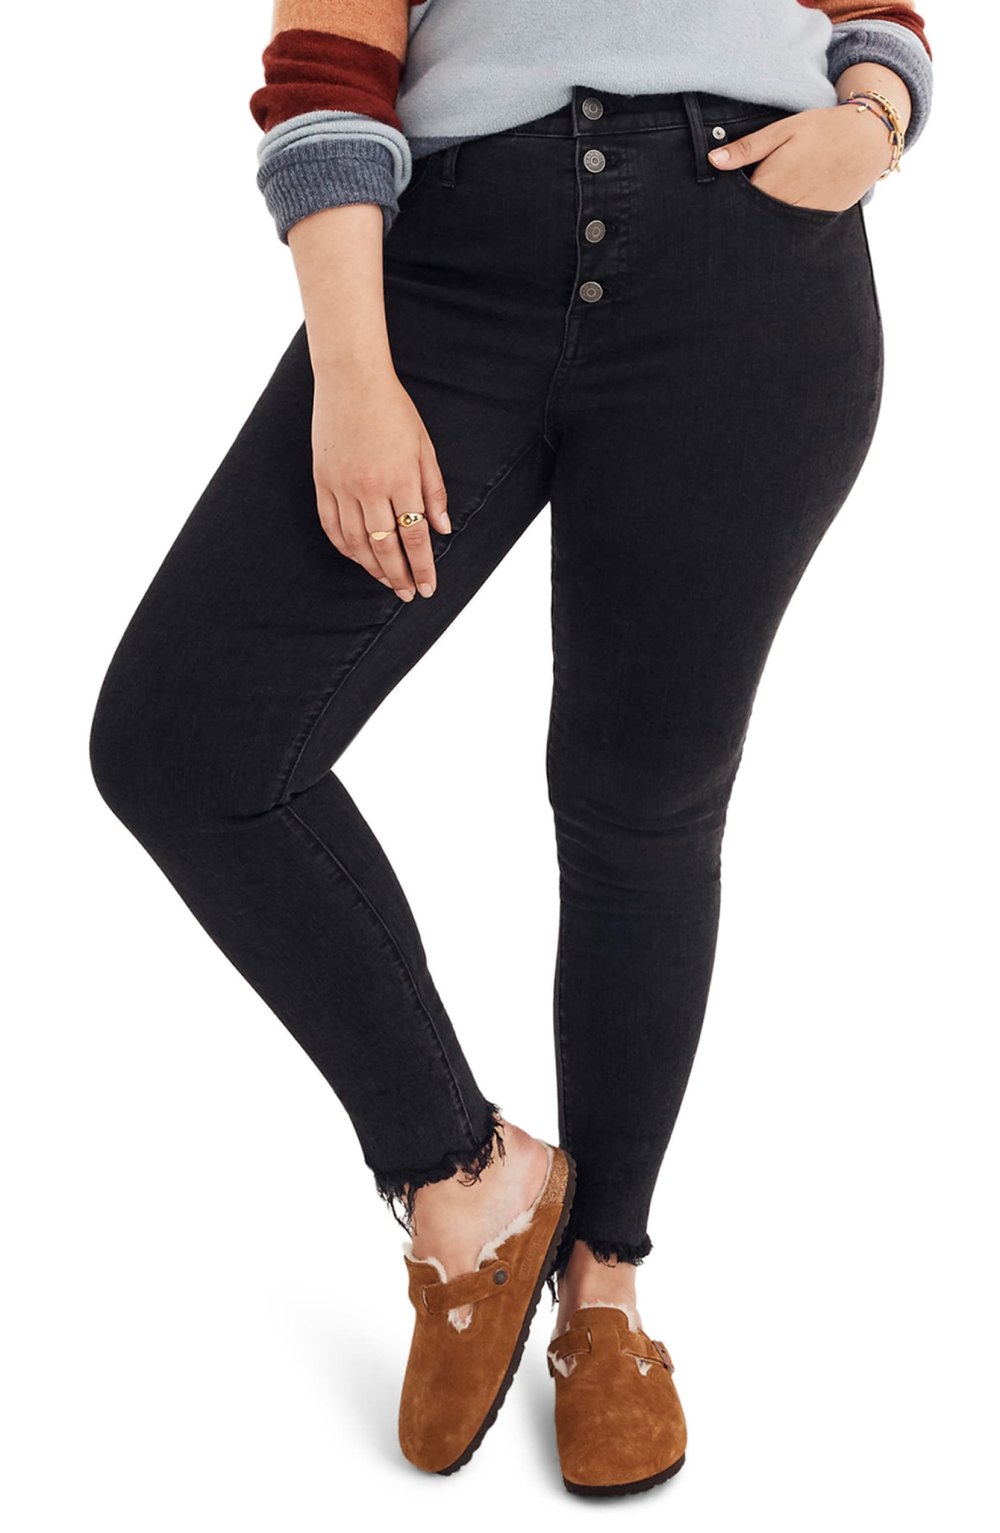 Madewell 9-Inch Button Ankle Skinny Jeans plus size